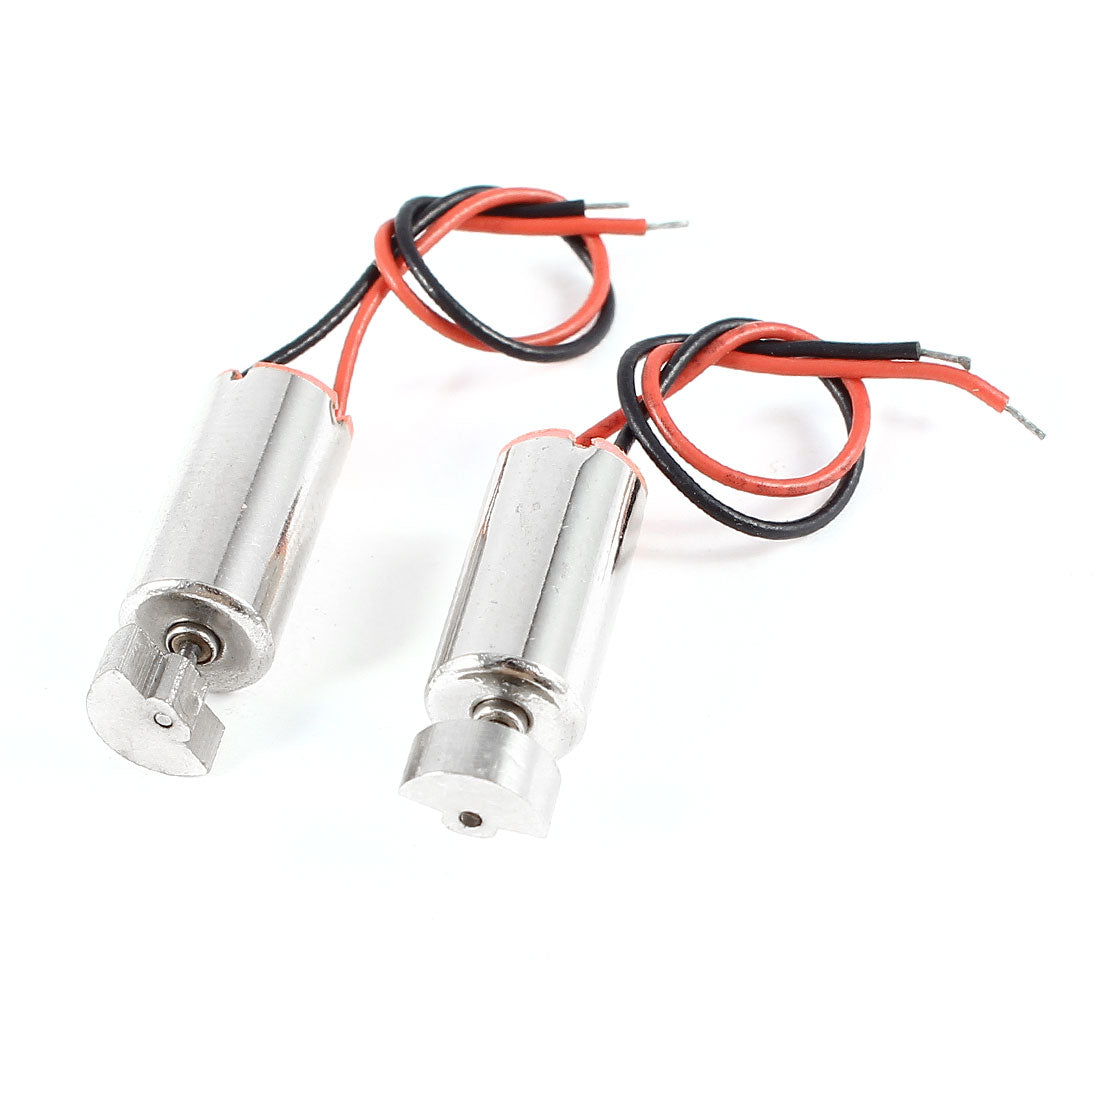 uxcell Uxcell 2 Pcs DC 1.5-3V 30000RPM Mini Coreless Vibration Motor 6x14mm for Game Device